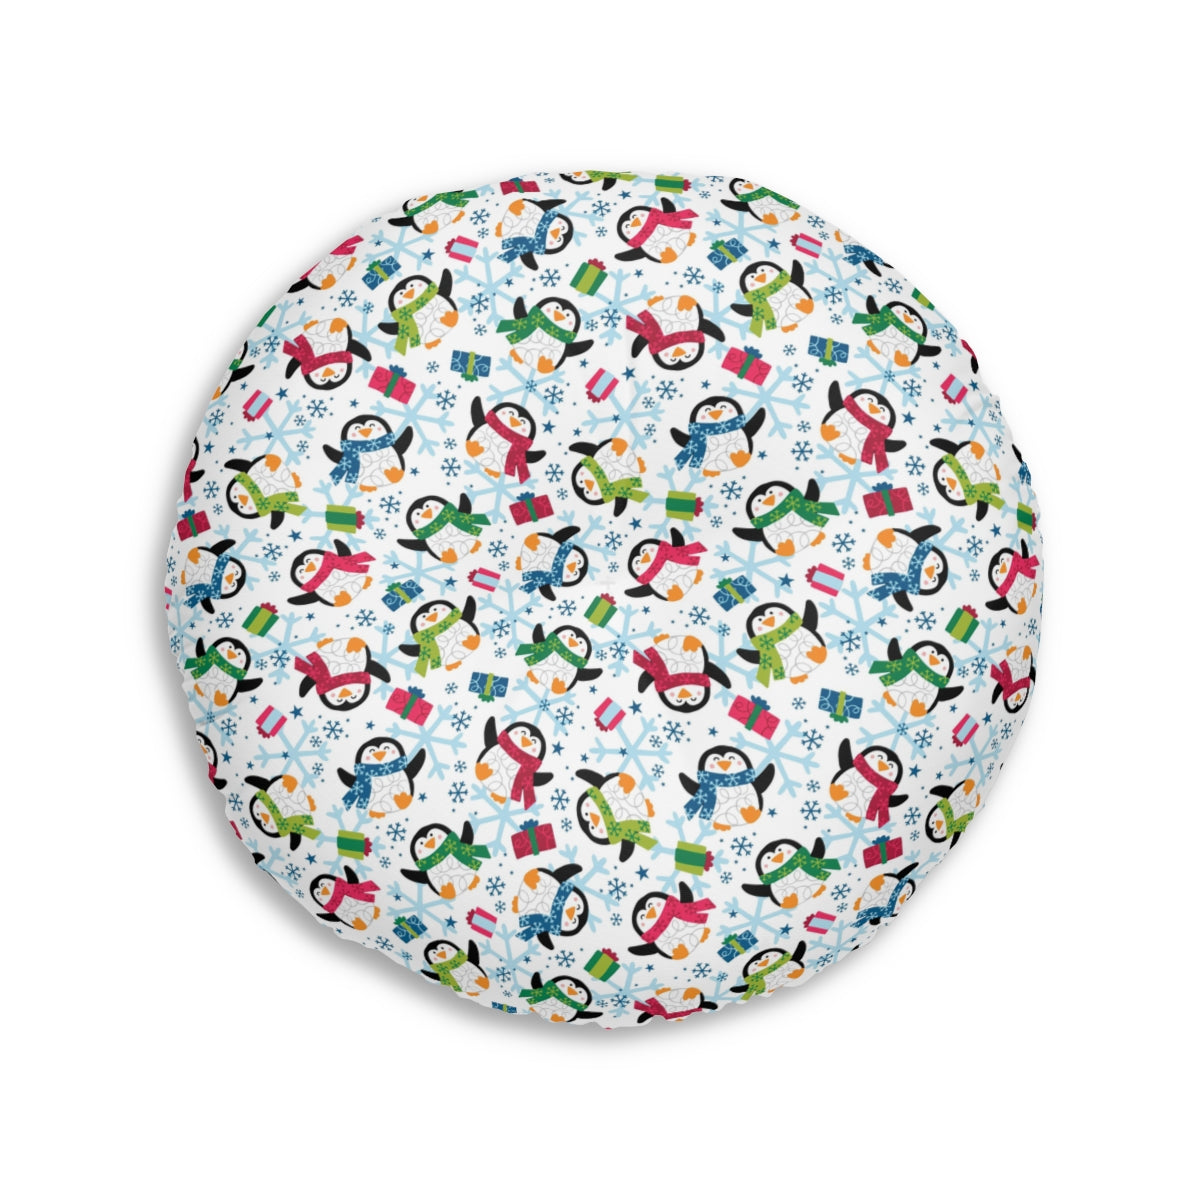 Penguins and Snowflakes Tufted Floor Pillow, Round